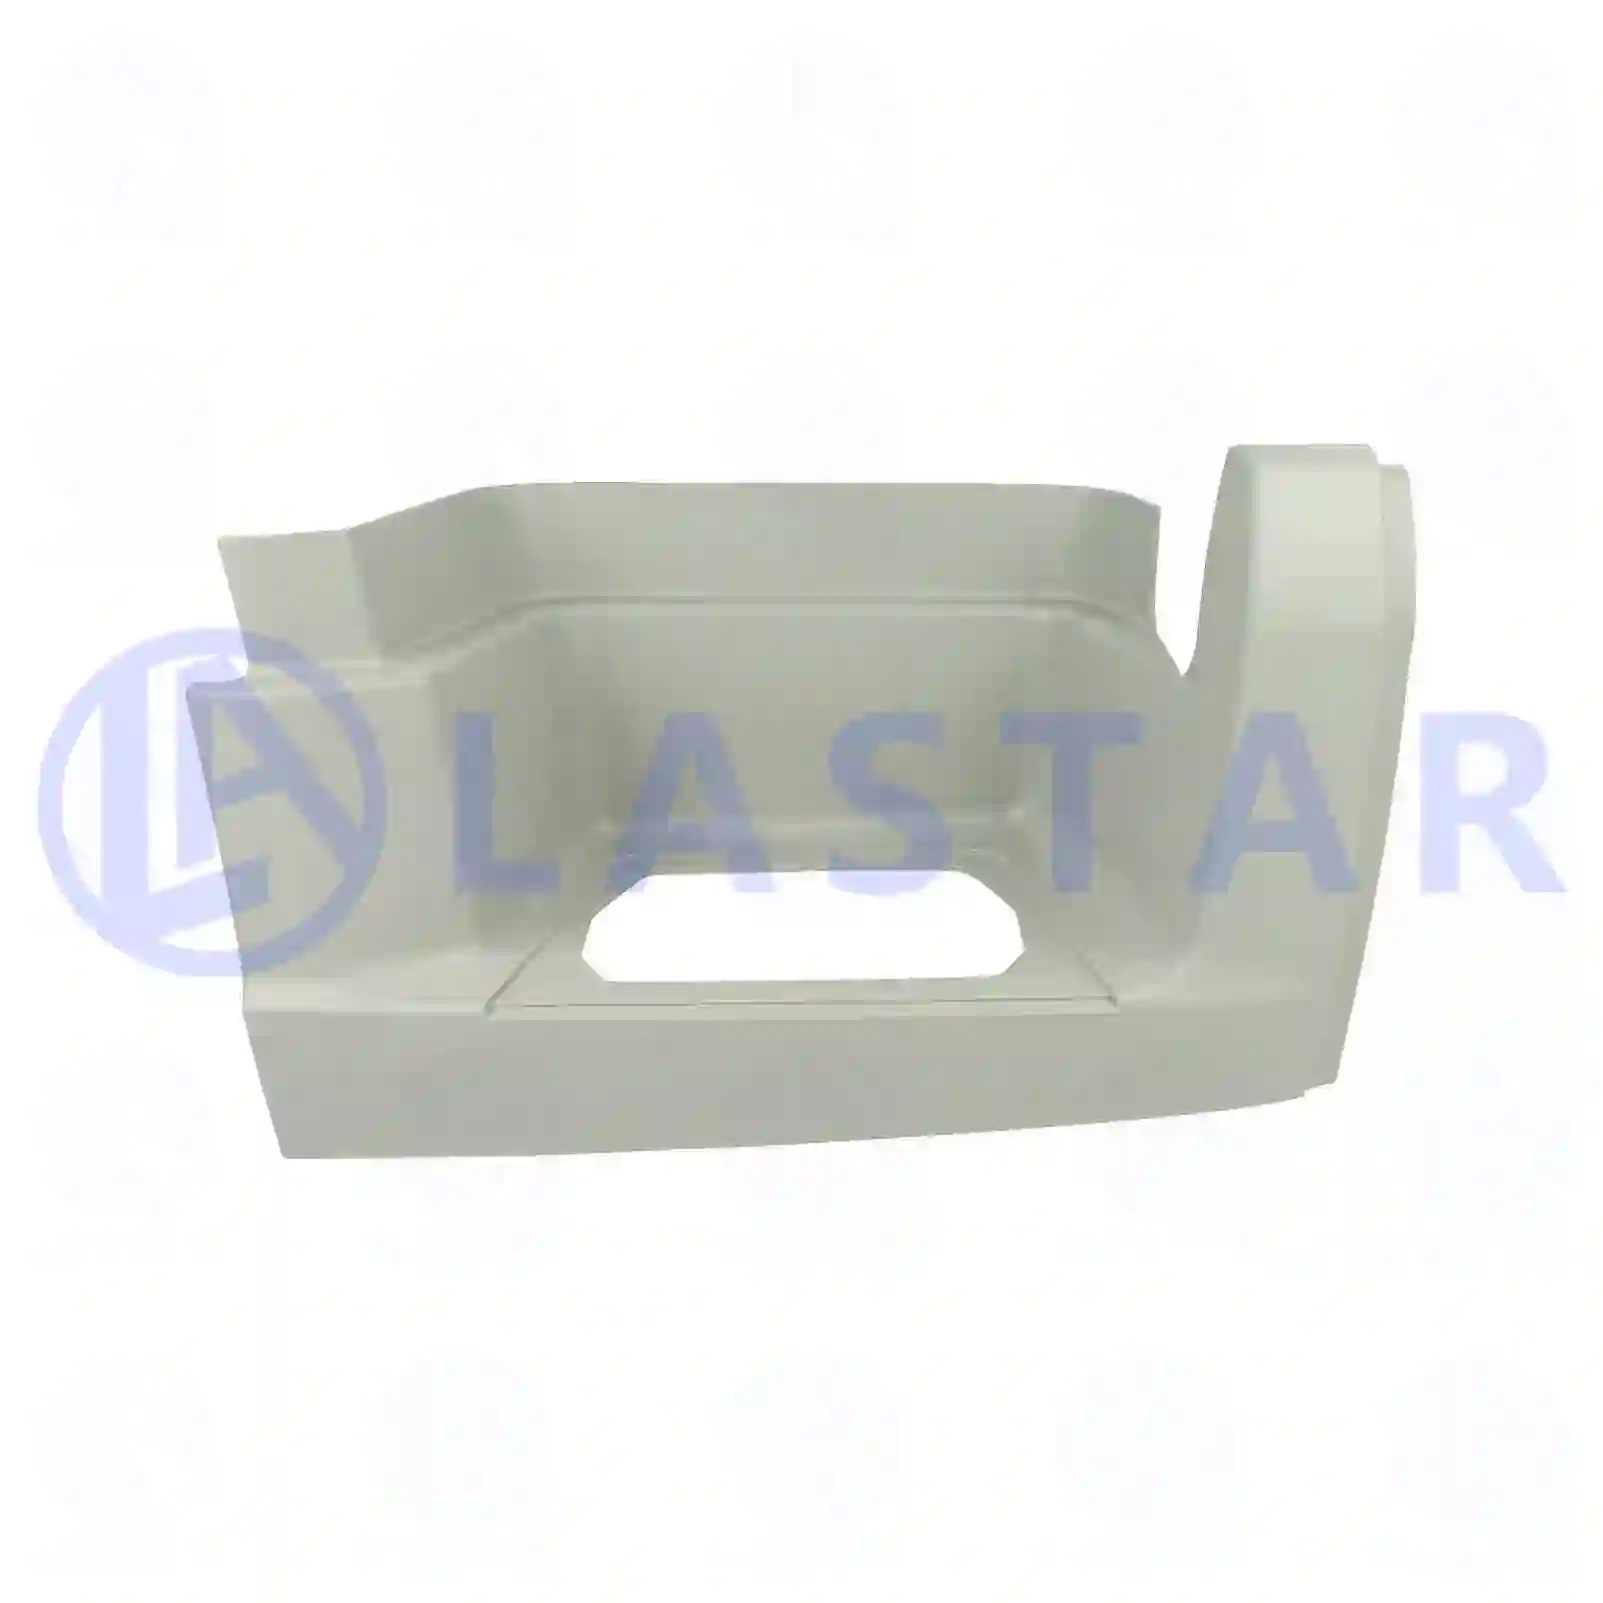 Step well case, right, 77719746, 1364799, 1695229, ZG61217-0008 ||  77719746 Lastar Spare Part | Truck Spare Parts, Auotomotive Spare Parts Step well case, right, 77719746, 1364799, 1695229, ZG61217-0008 ||  77719746 Lastar Spare Part | Truck Spare Parts, Auotomotive Spare Parts